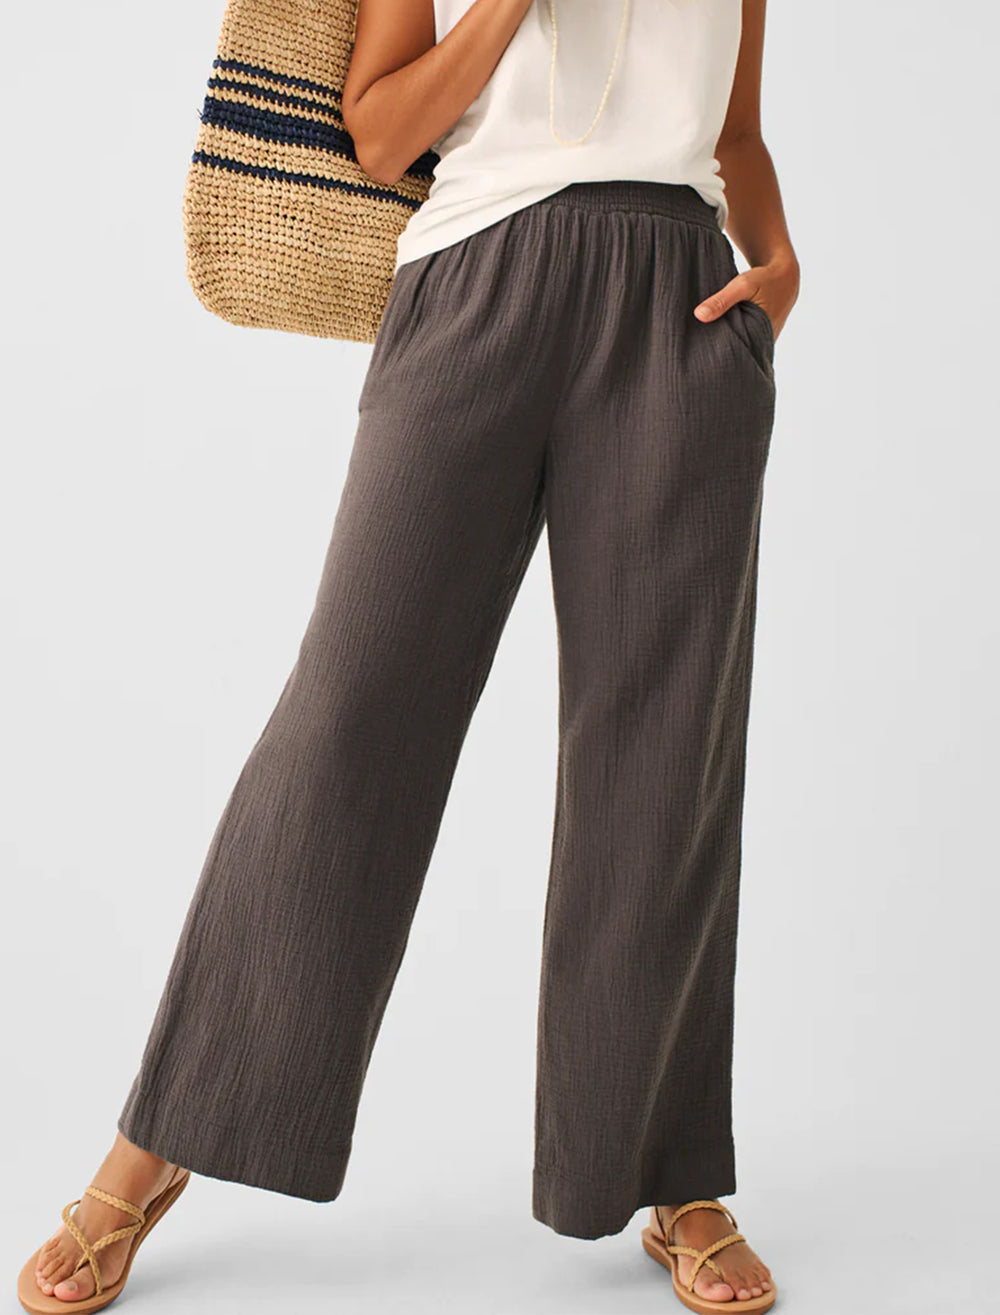 Model wearing Faherty's wide leg gauze pant in washed black.